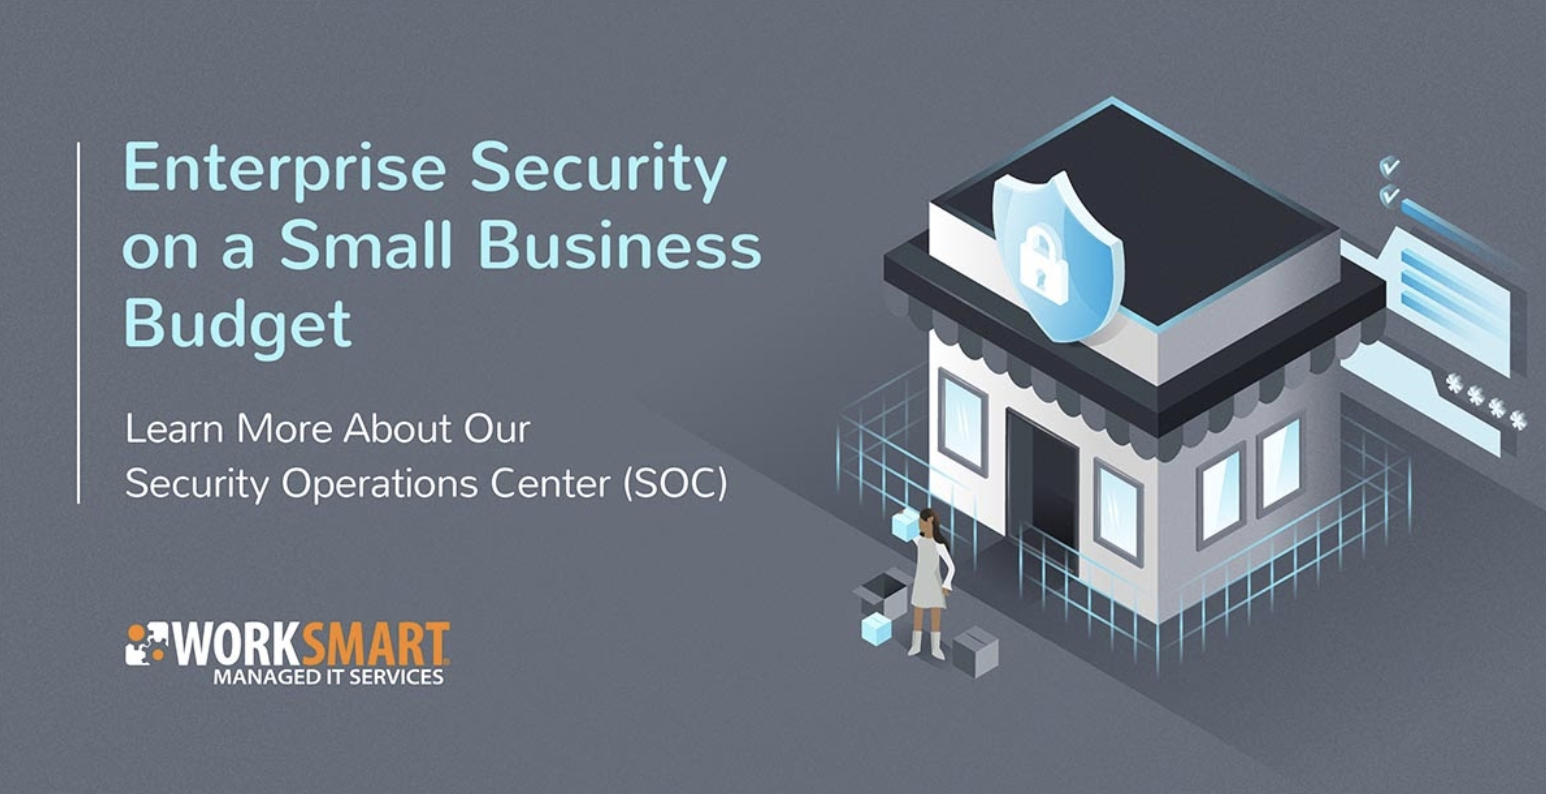 Enterprise Security on a Small Business Budget